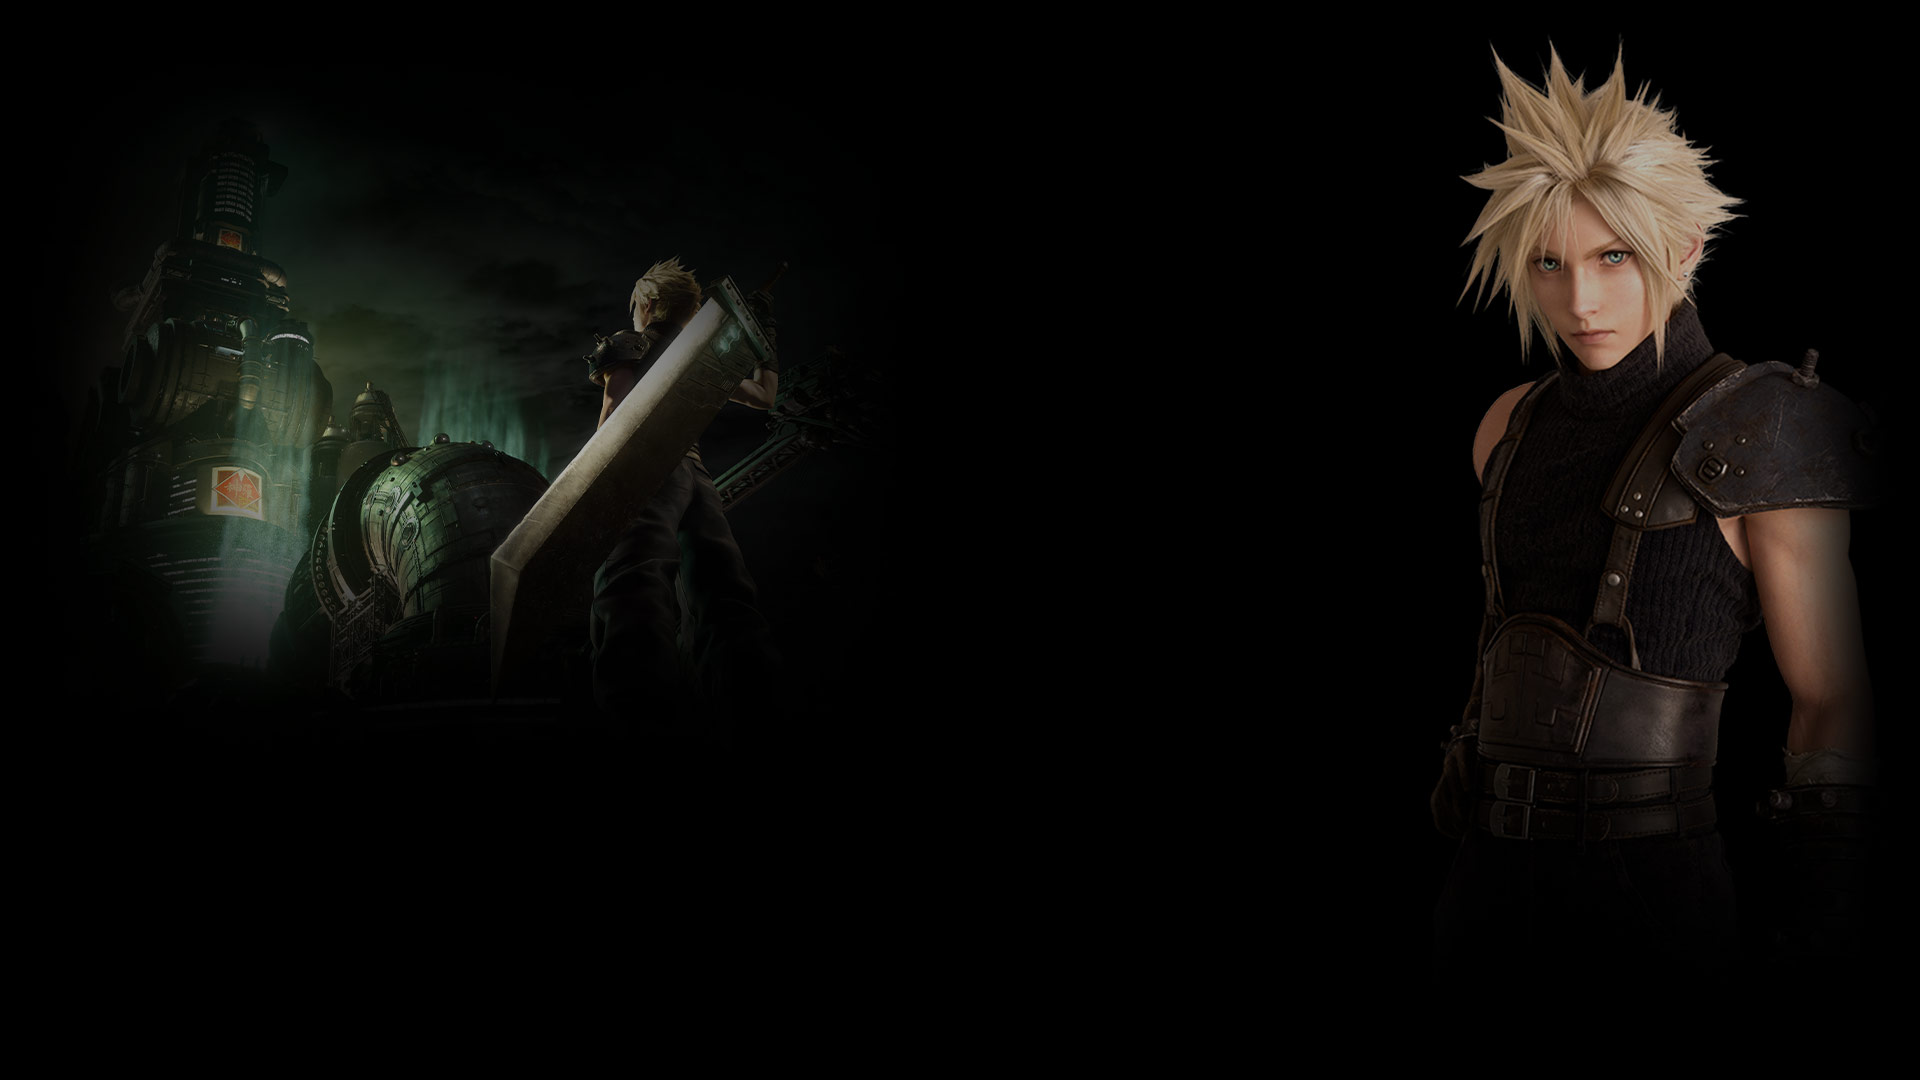 Final Fantasy VII Remake Updated On Steam Database Today - Noisy Pixel